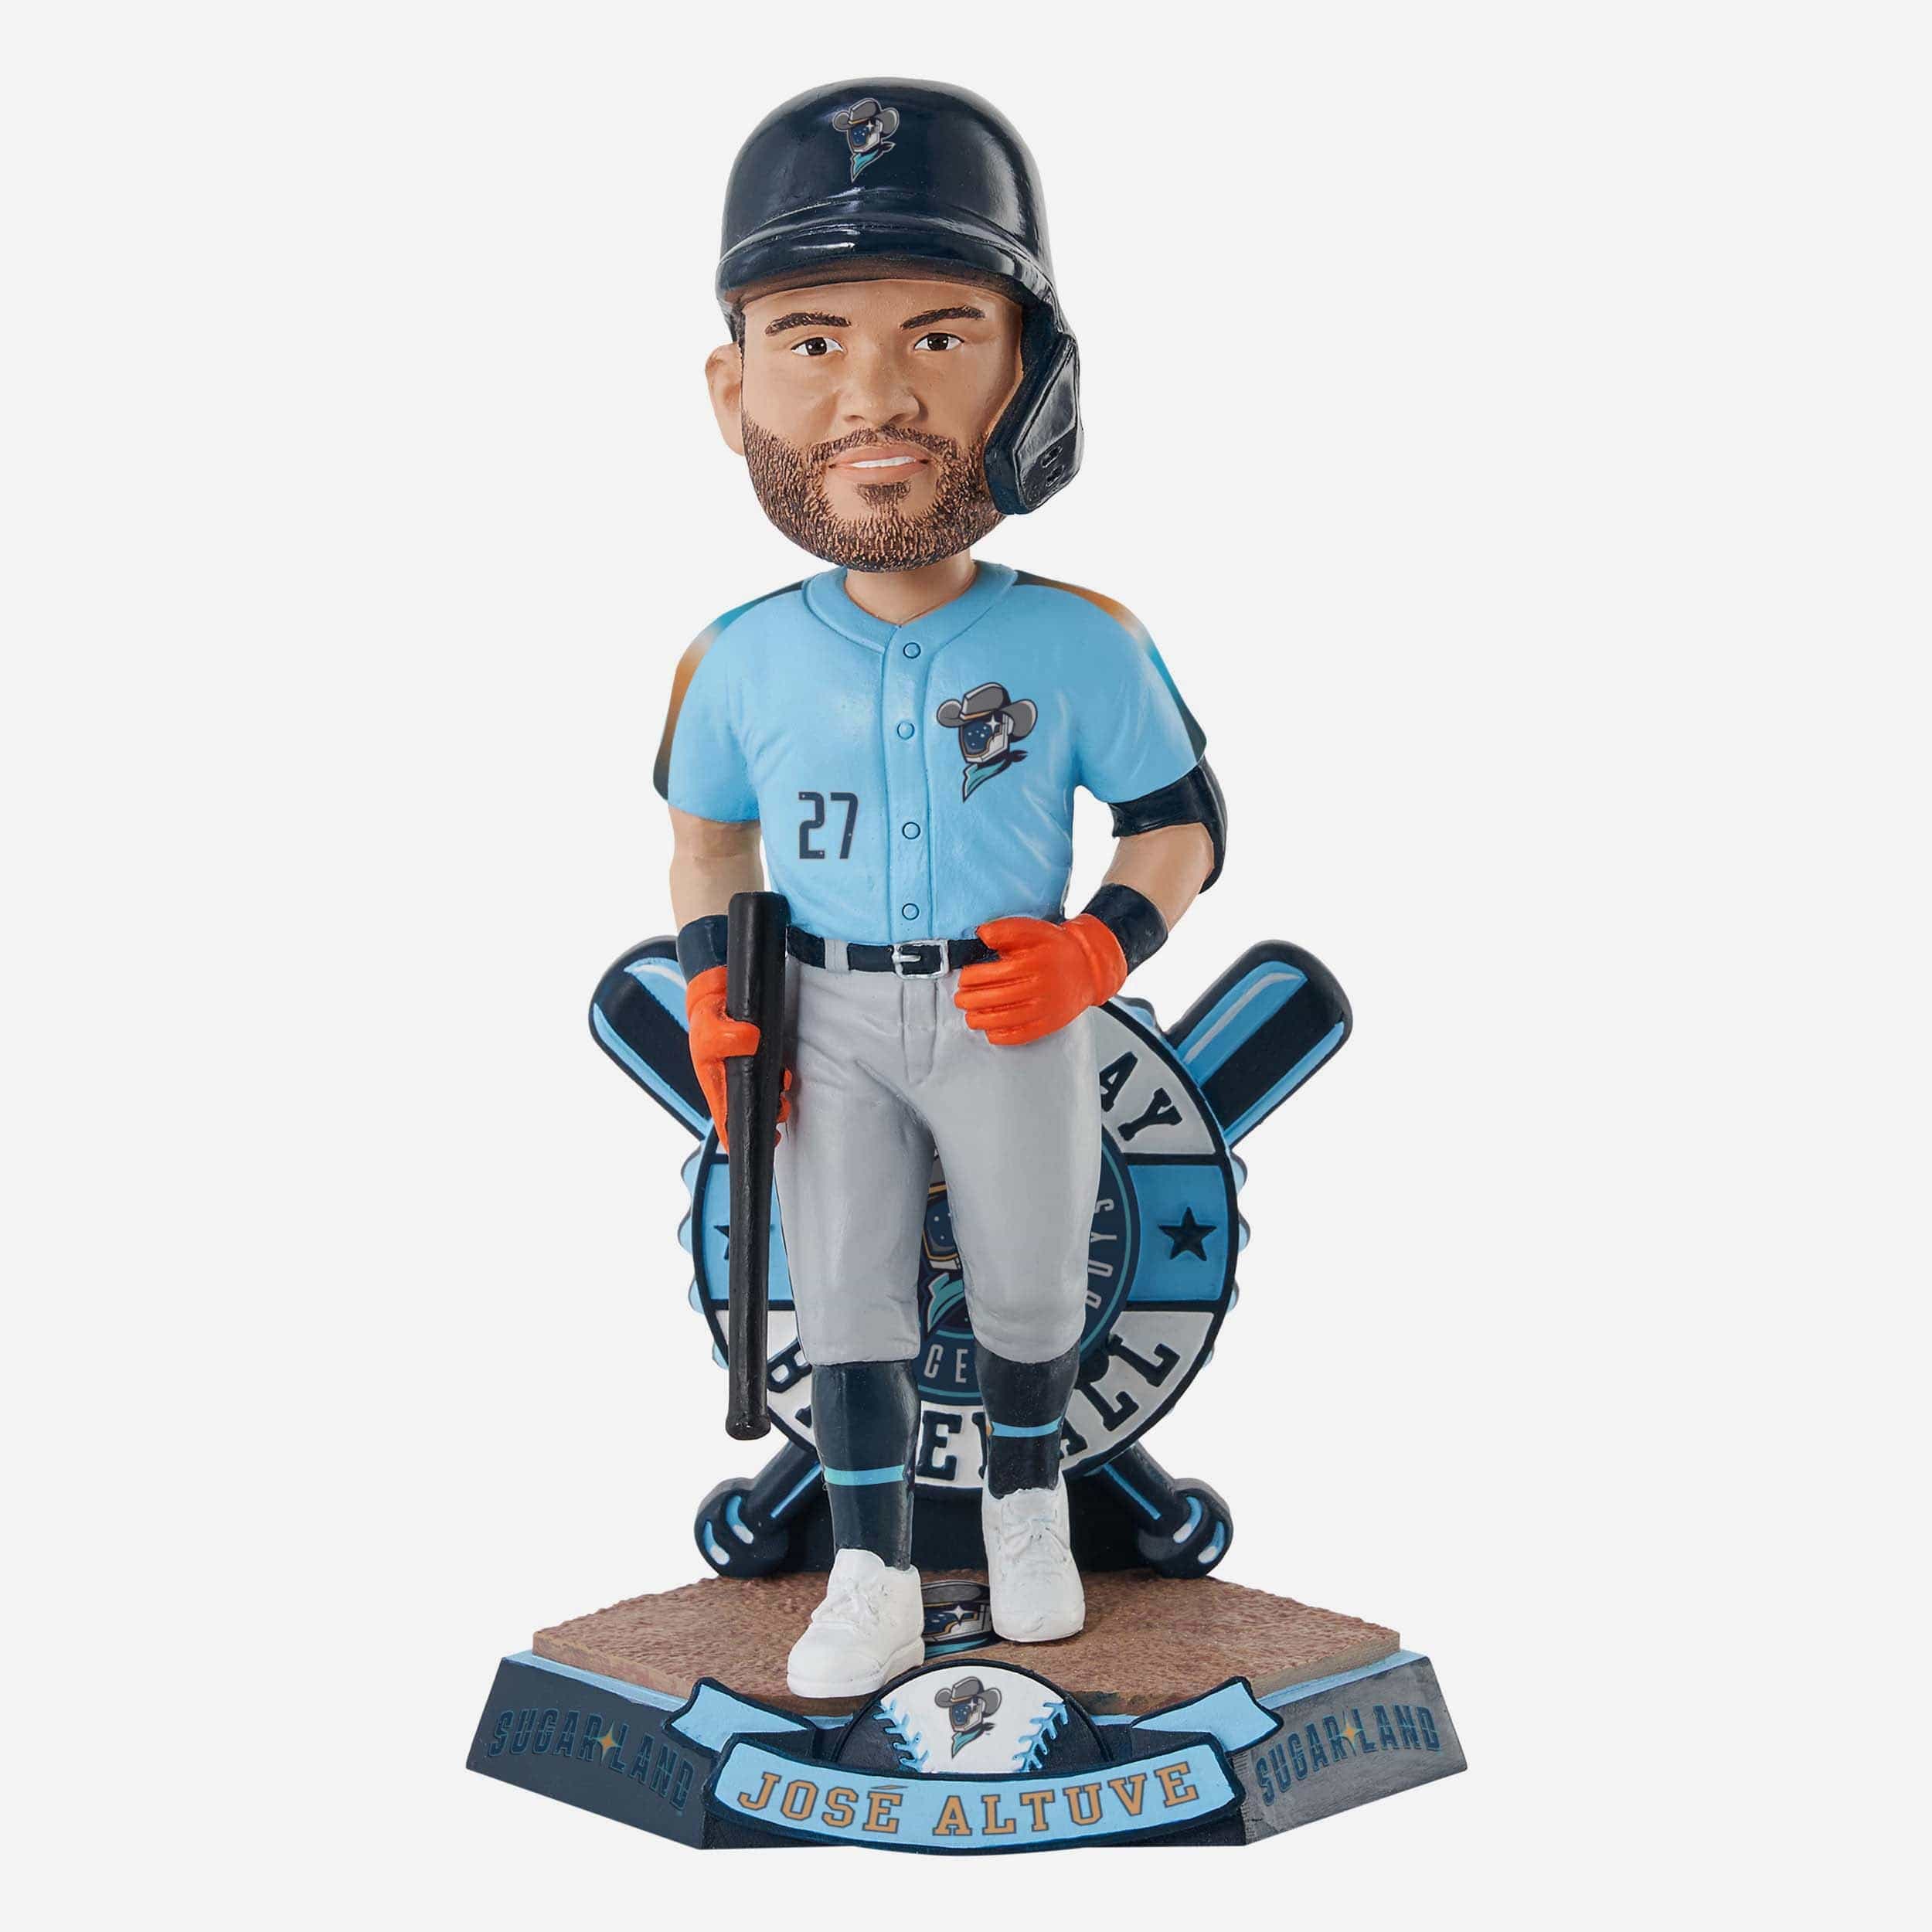 Jose Altuve Sugar Land Space Cowboys Minor League Bobblehead Officially Licensed by Milb